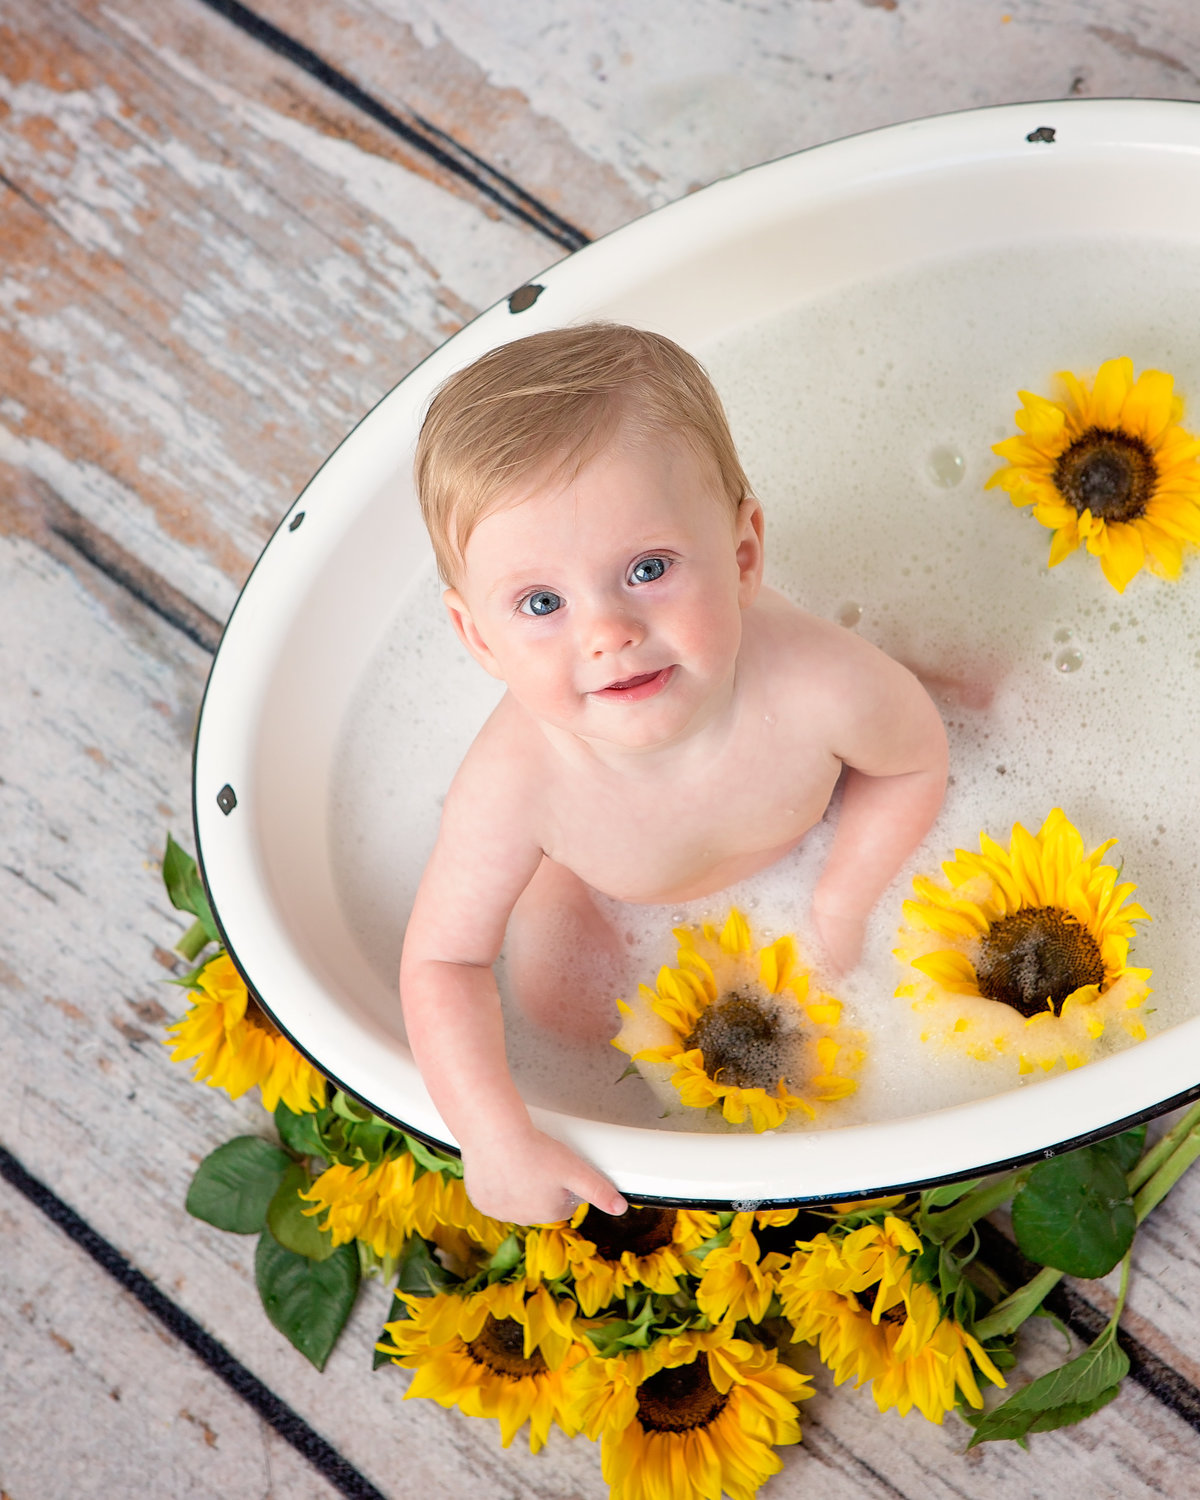 blue-eyed-baby-sitting-in-antique-bubble-bath-sunflowers-5F0A4766